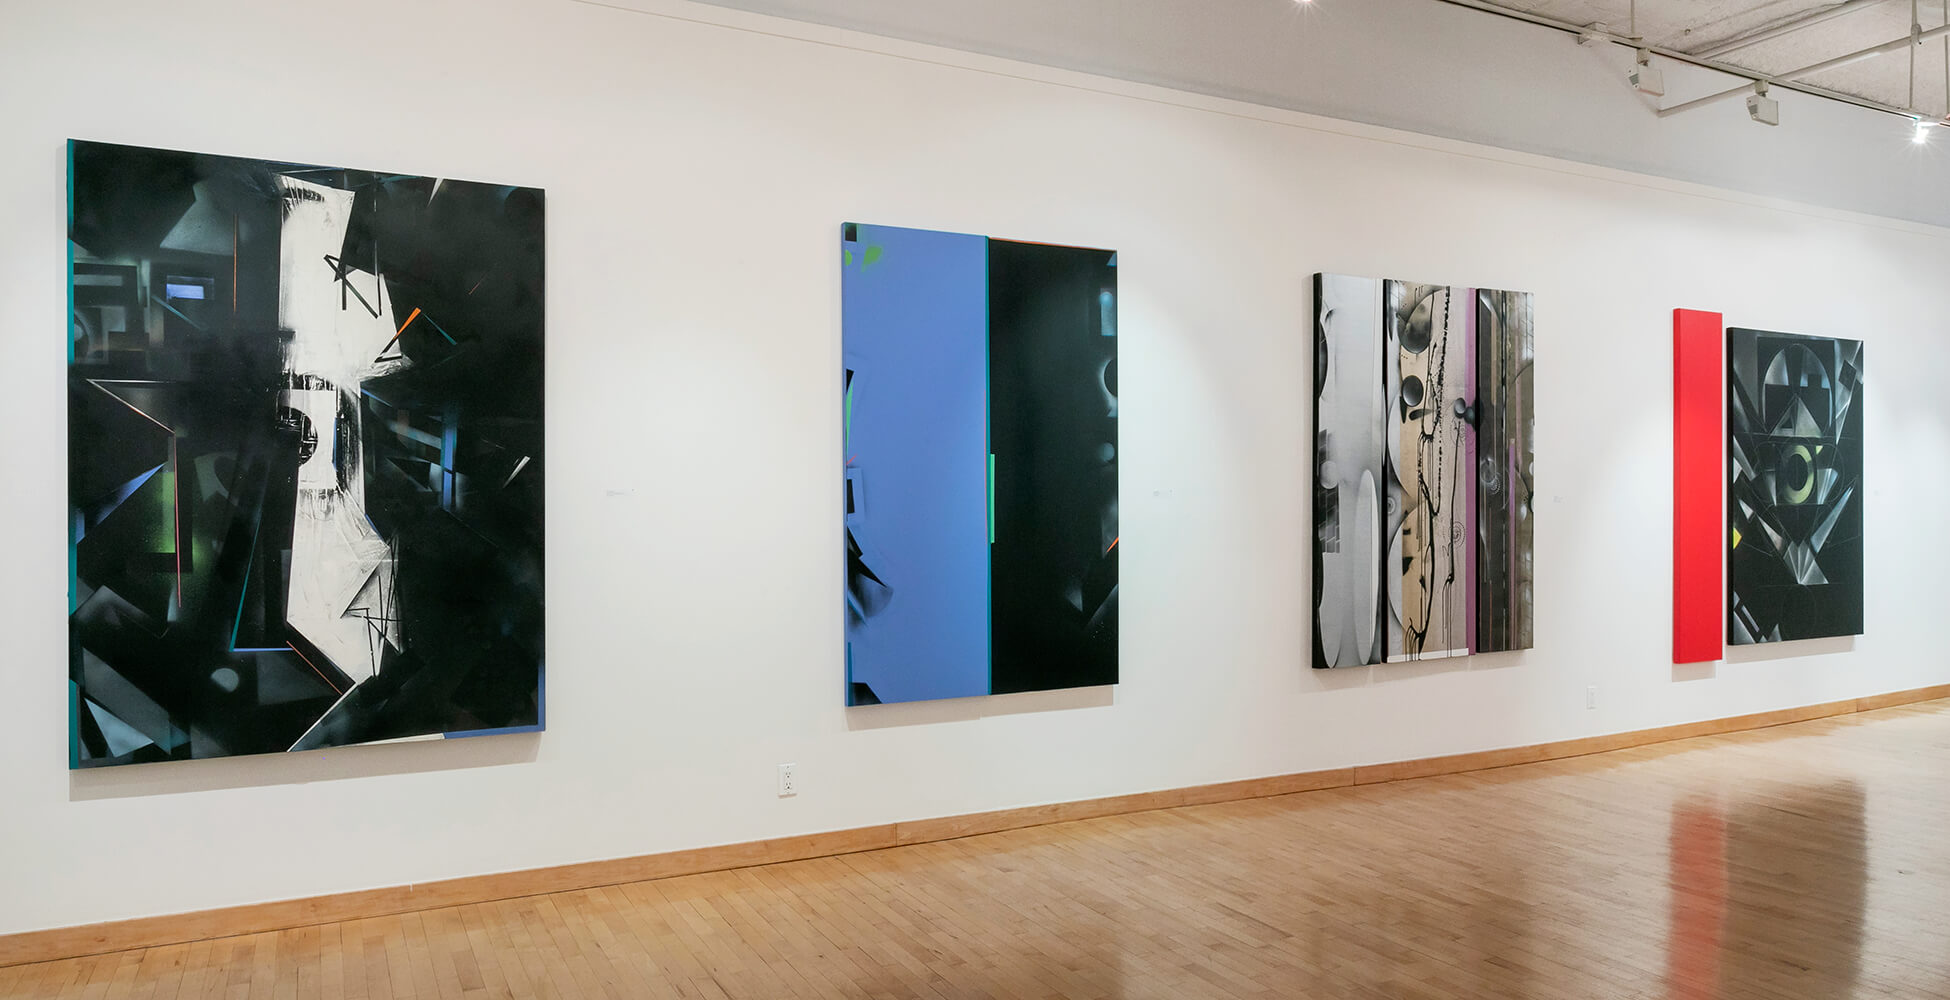 Installation View #2 of Nola Zirin's recent exhibition entitled 'Assembling Chaos' at June Kelly Gallery, Spring 2022.